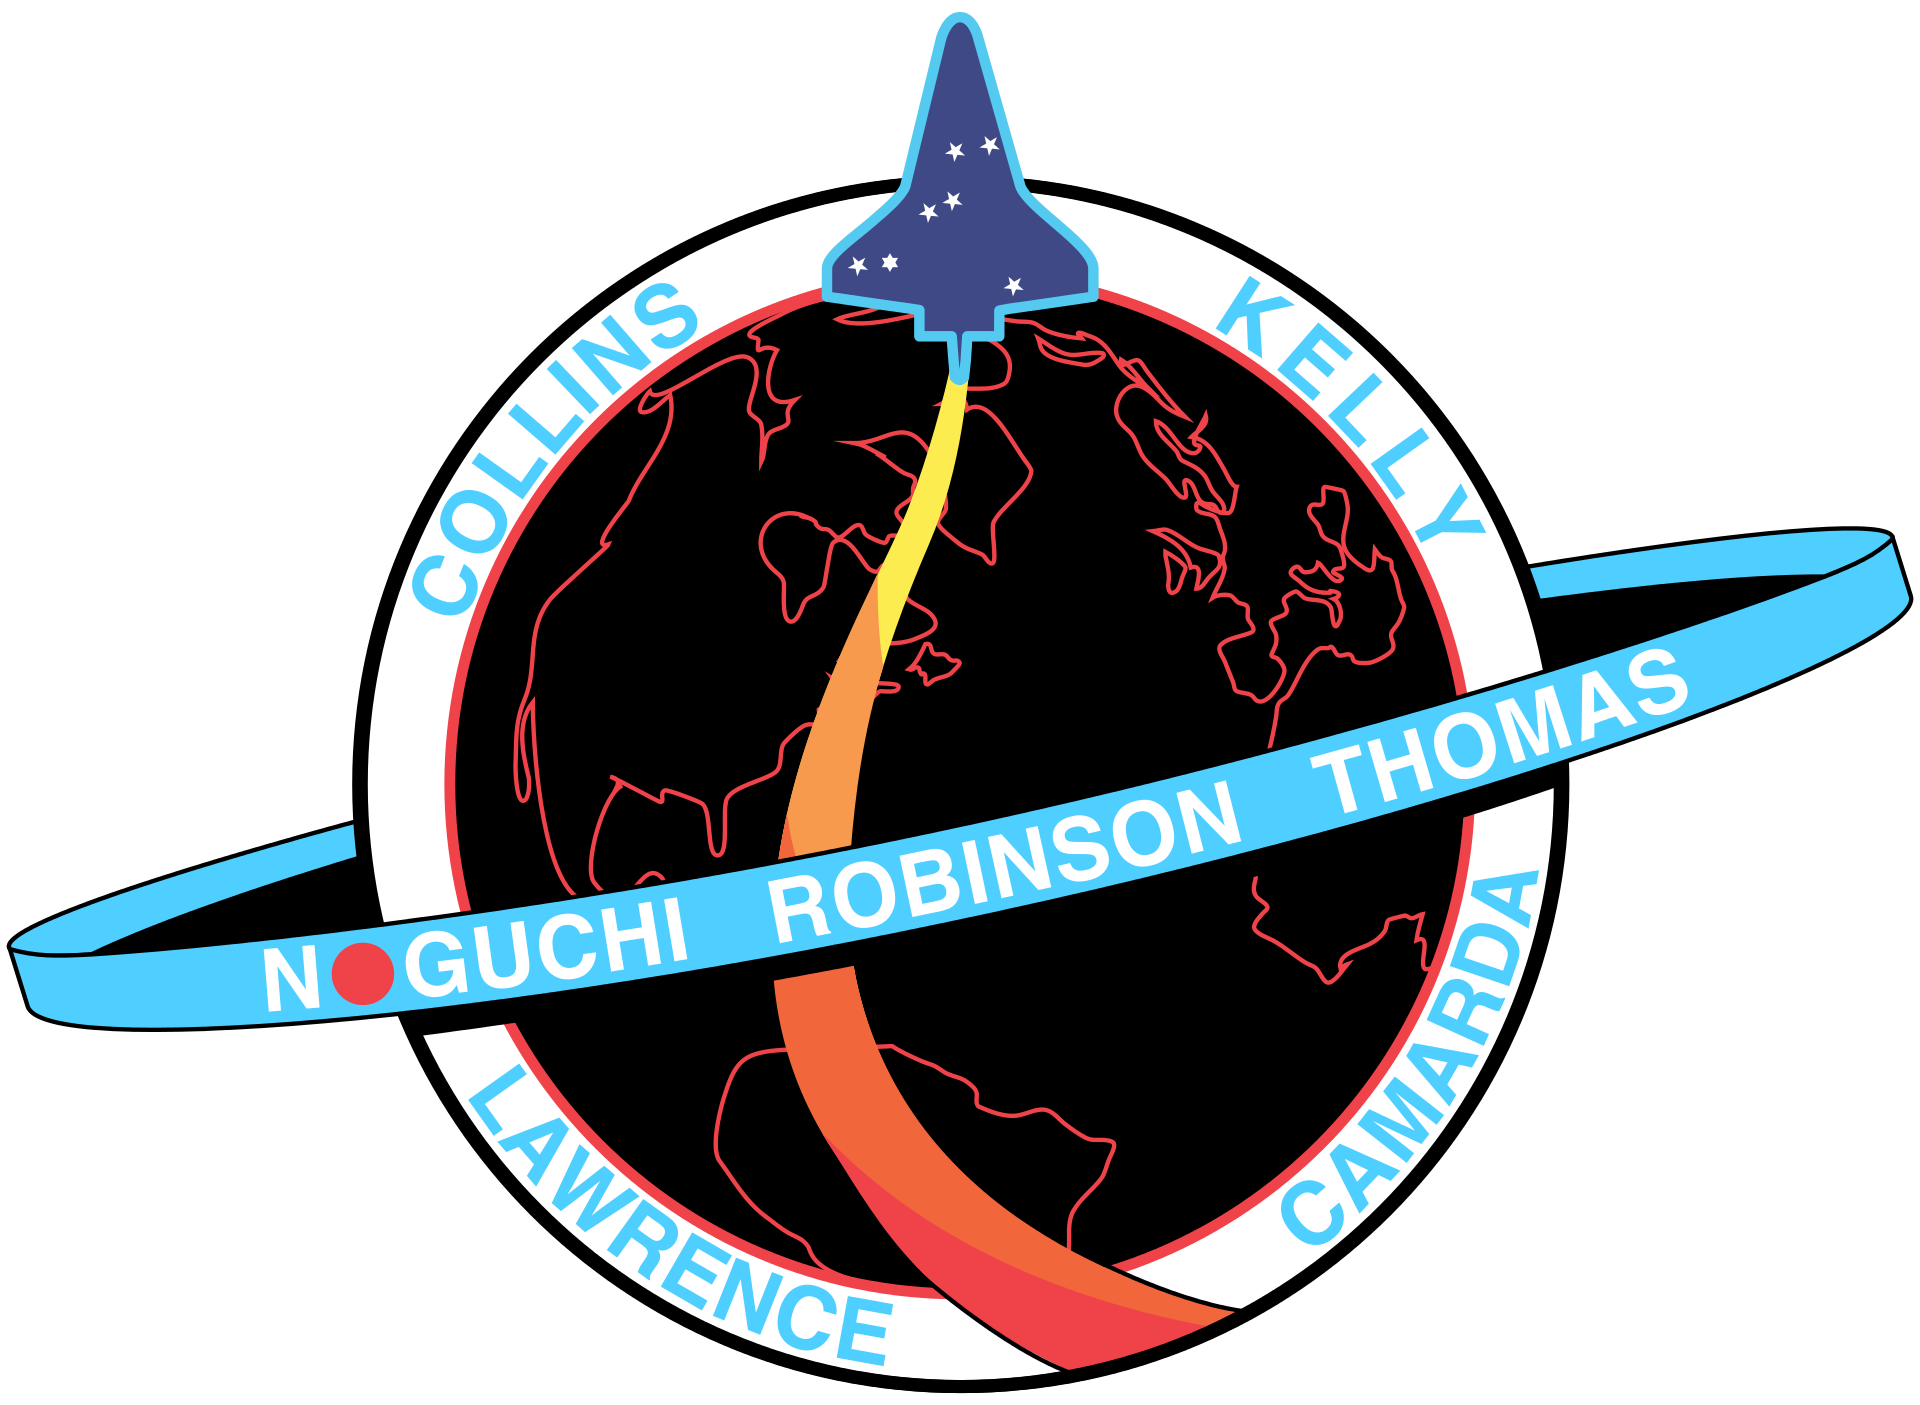 Mission patch for STS-114